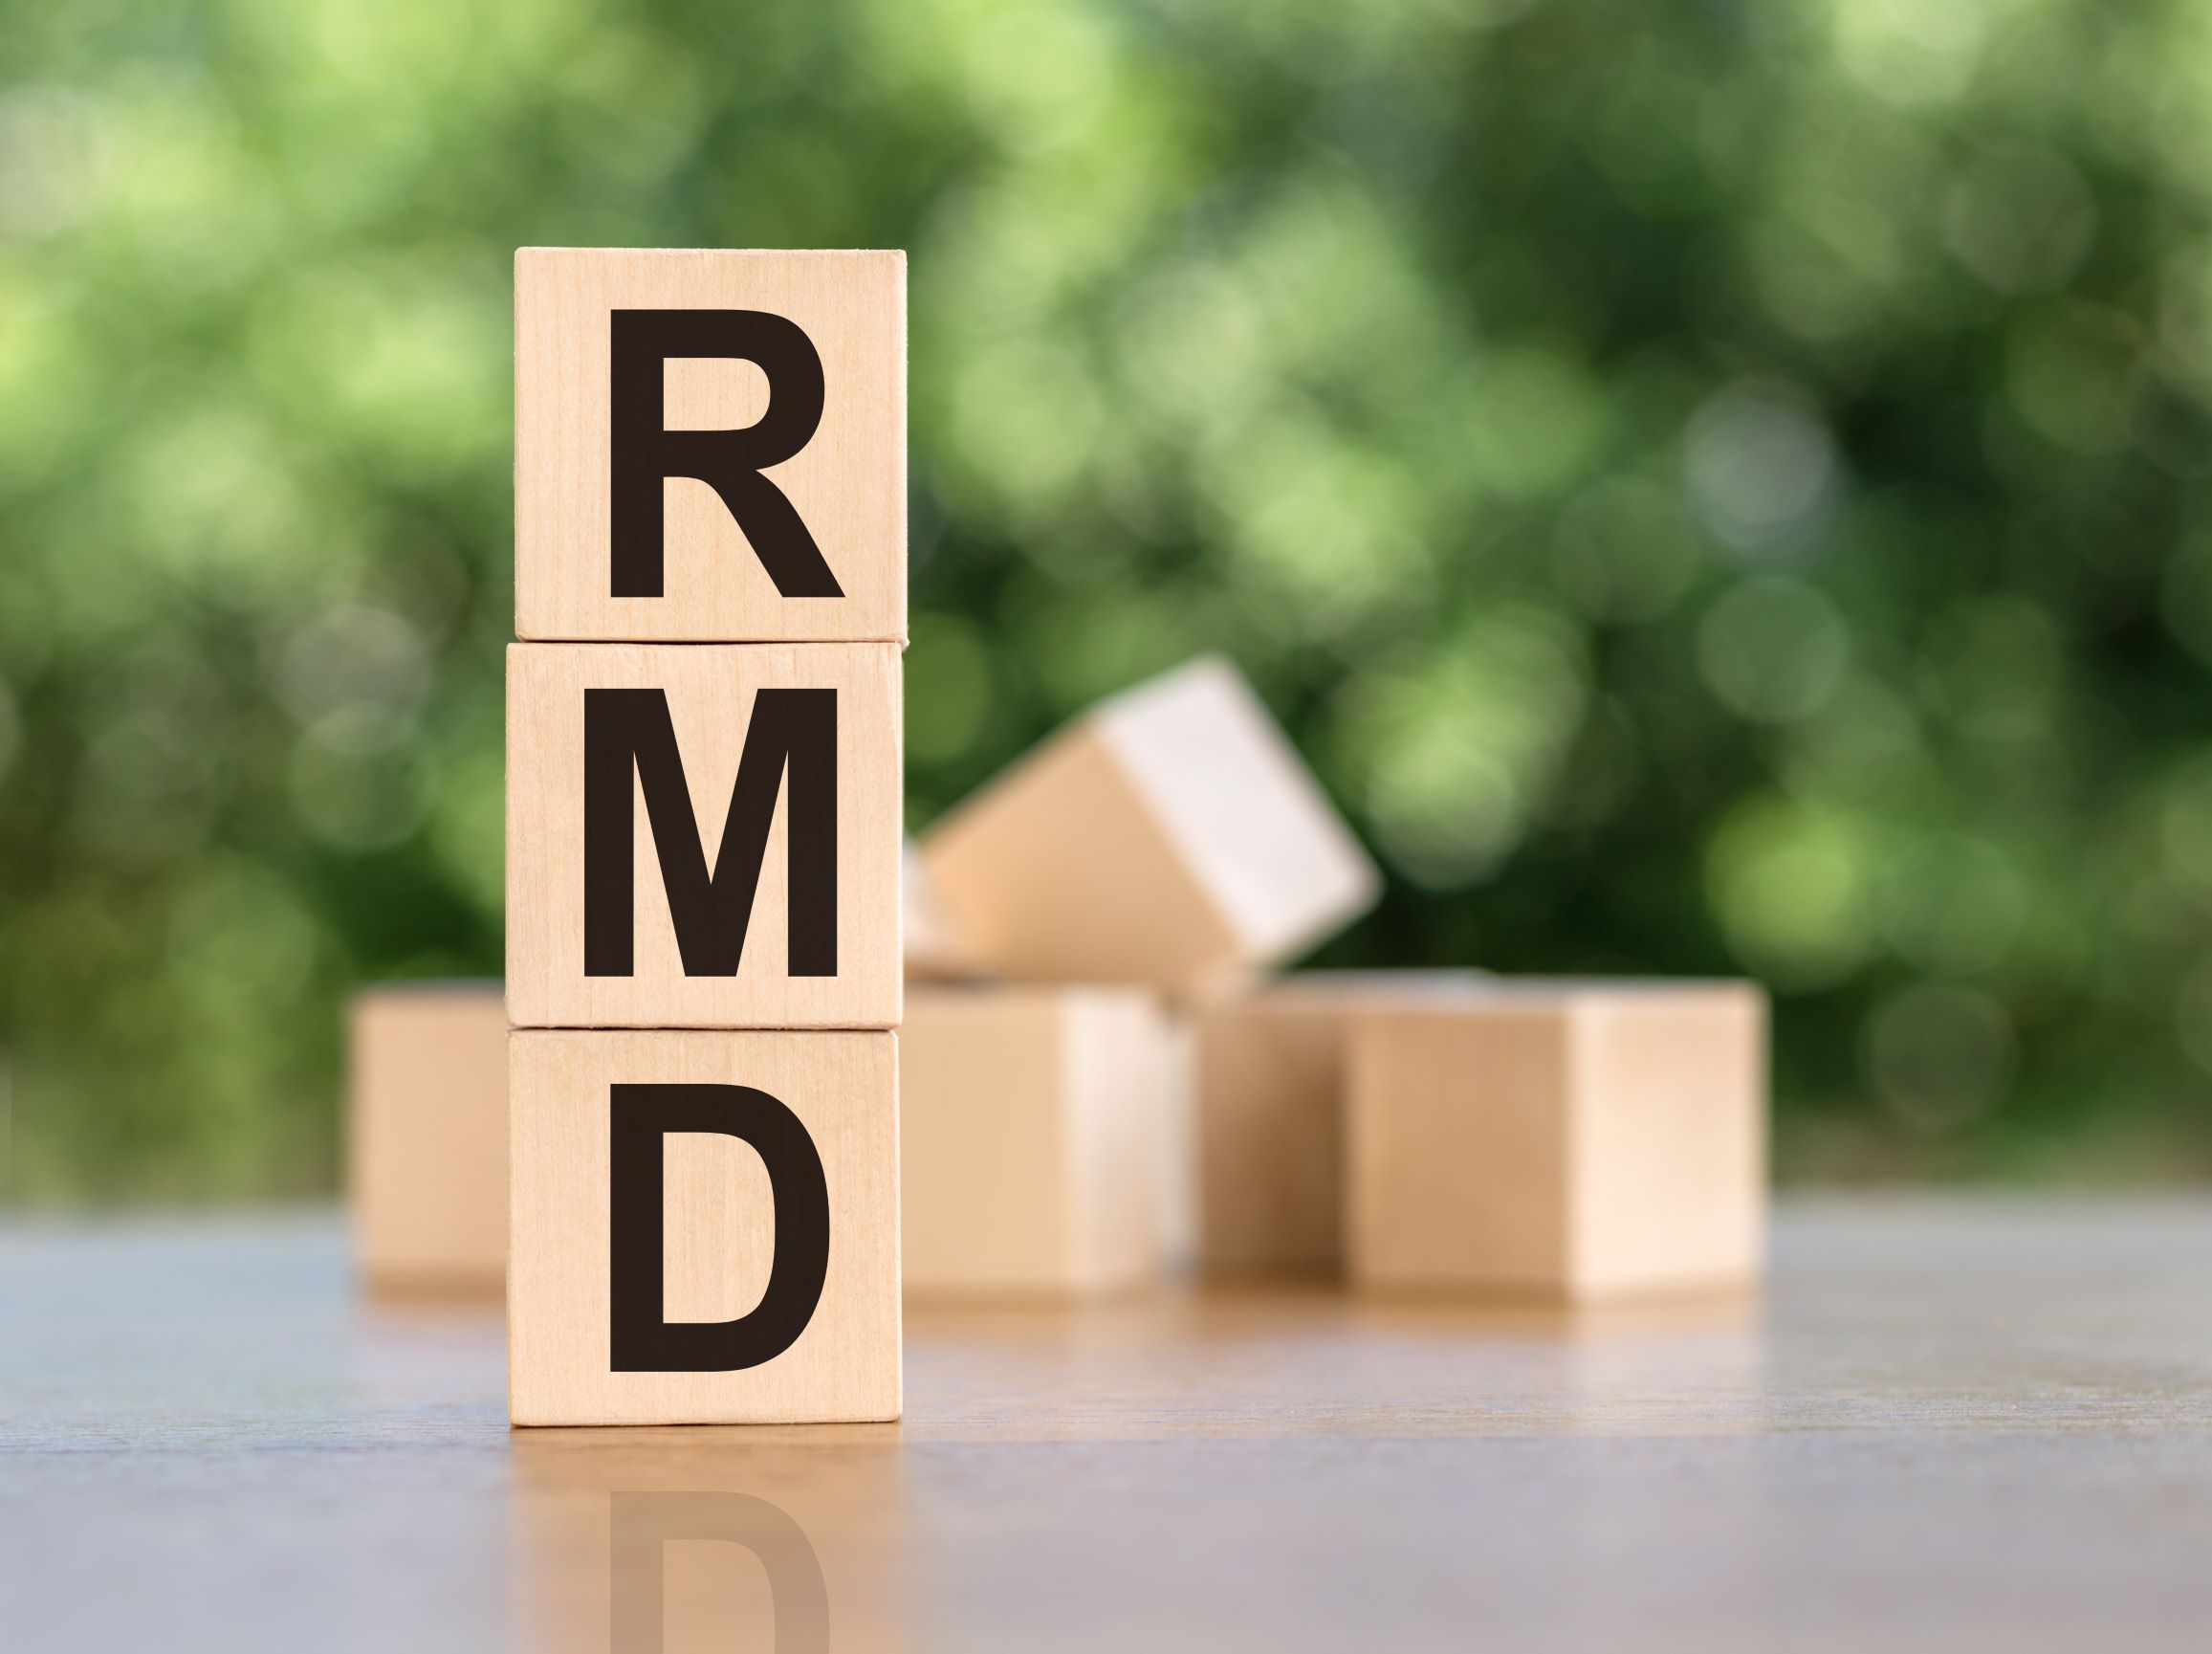 Required Minimum Distribution (RMD) Changes in 2020